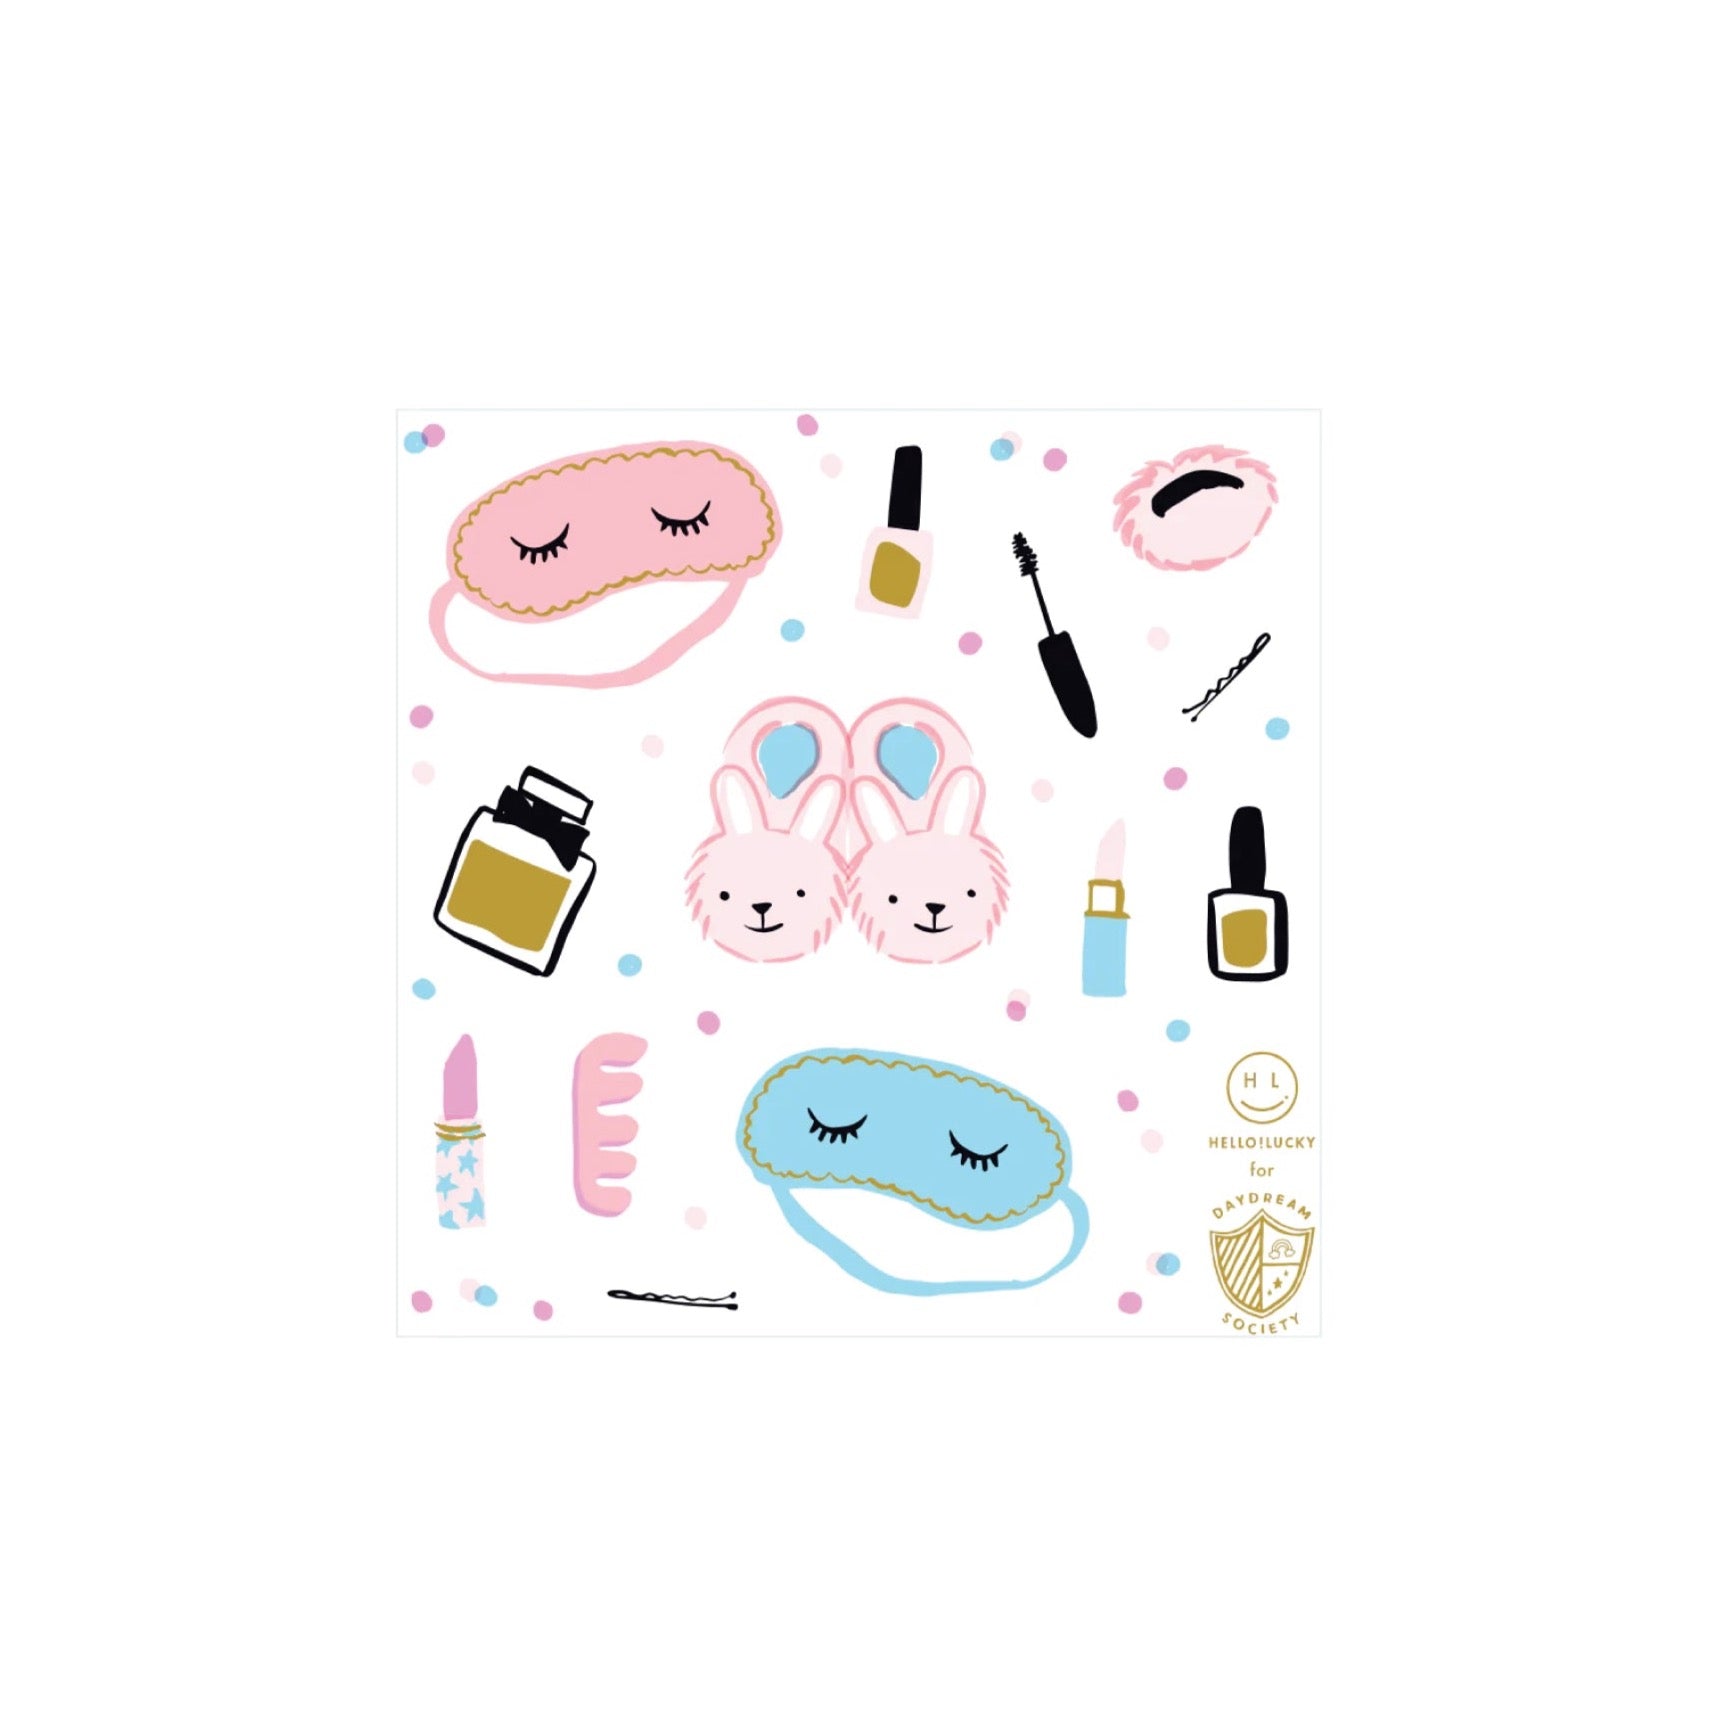 Eyelashes & Cheeks Balloon Stickers, 2 Sheets | The Party Darling